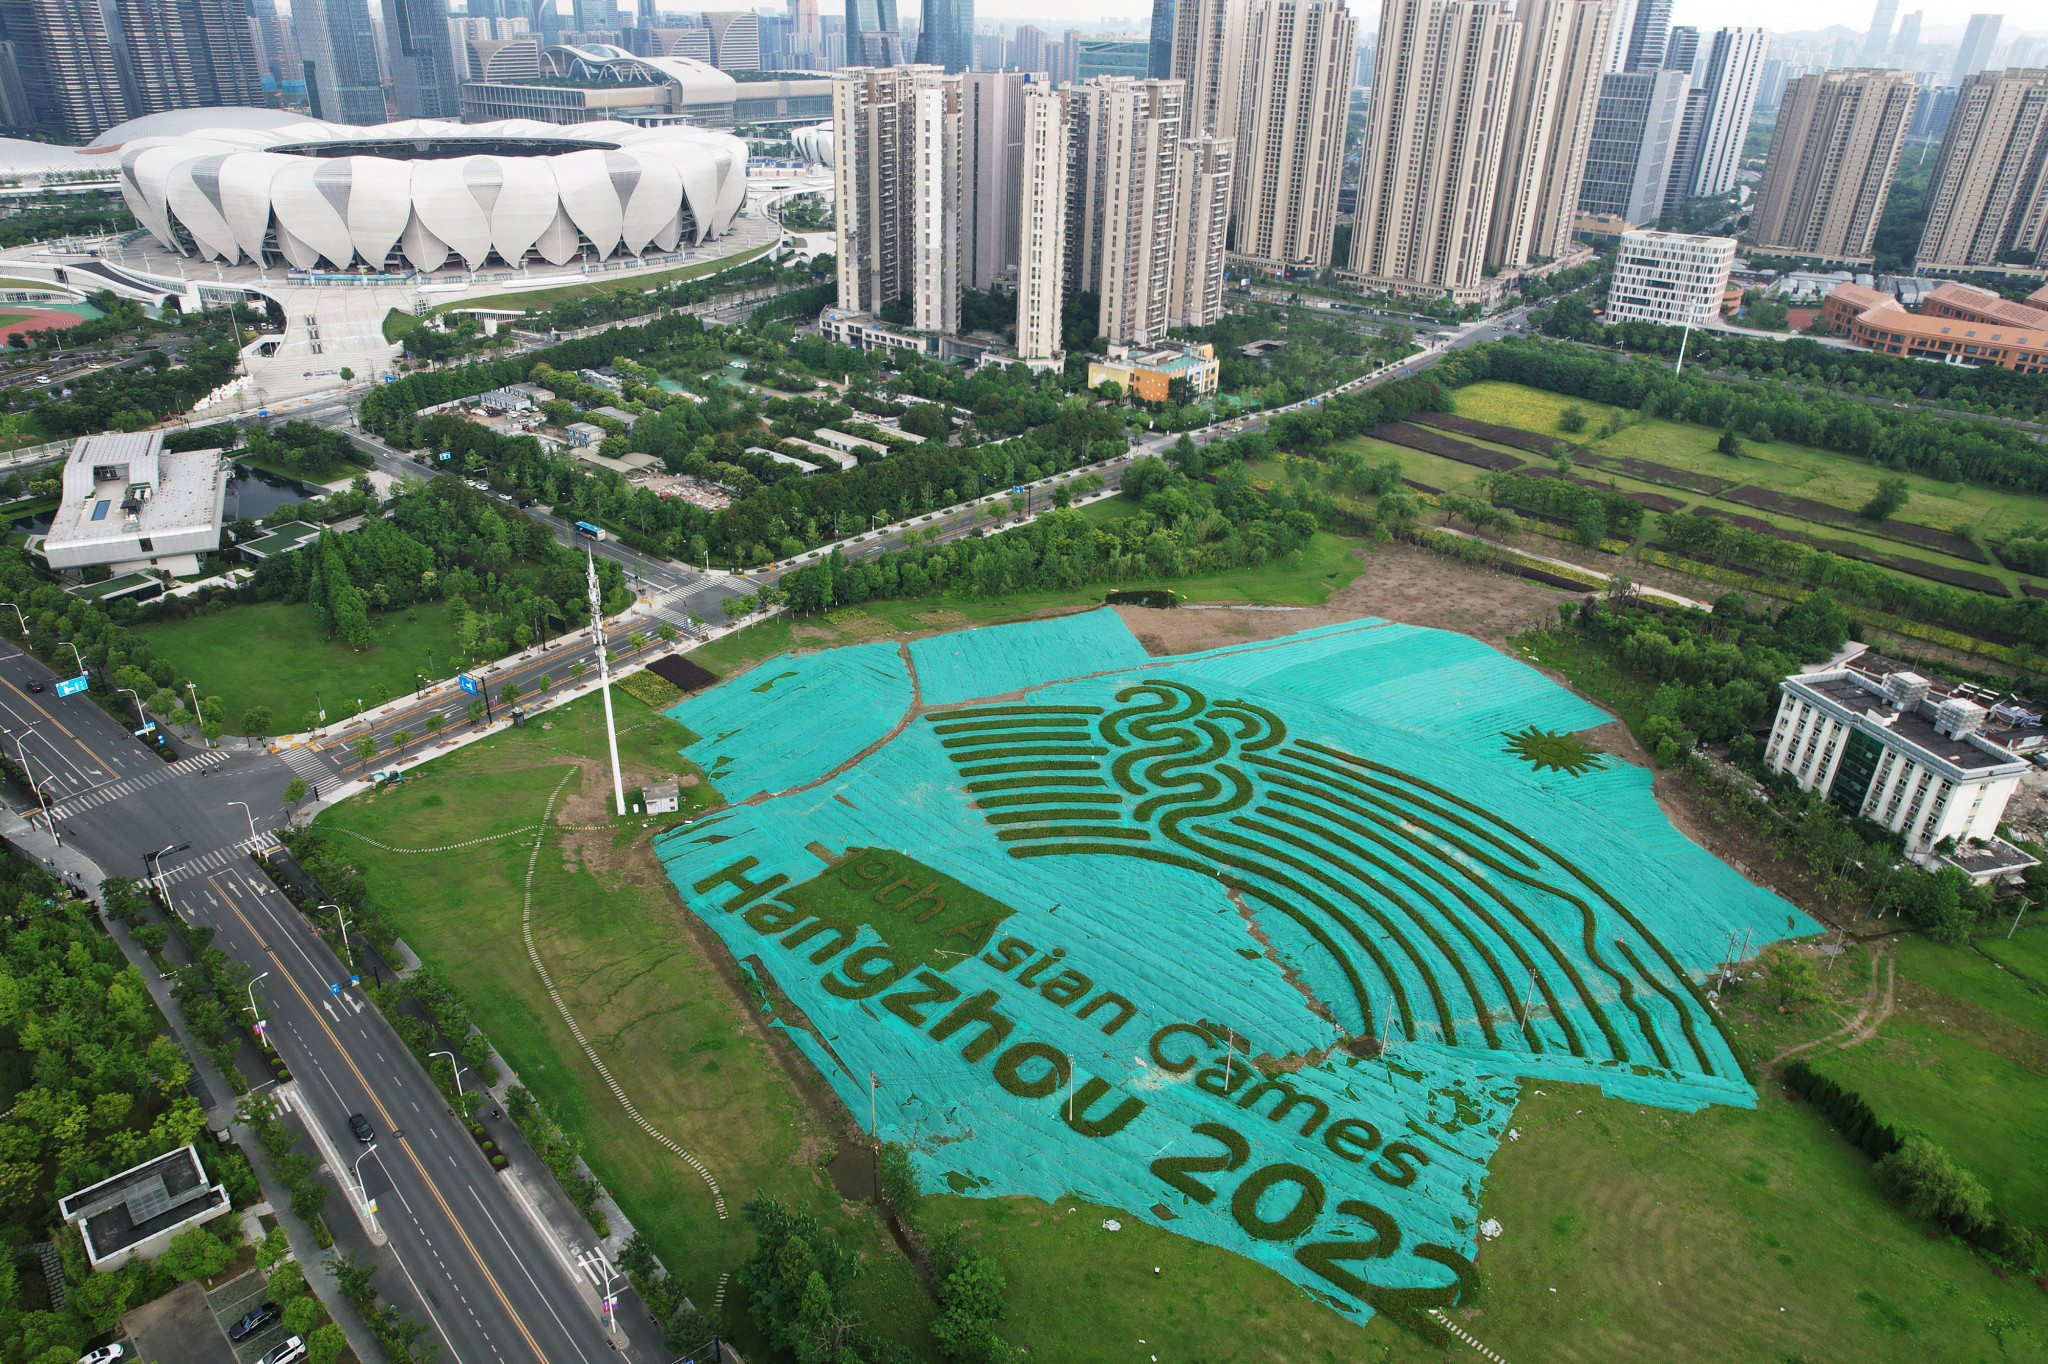 The OCA is set to hold an Asian Games anniversary celebration at Hangzhou 2022 ©OCA